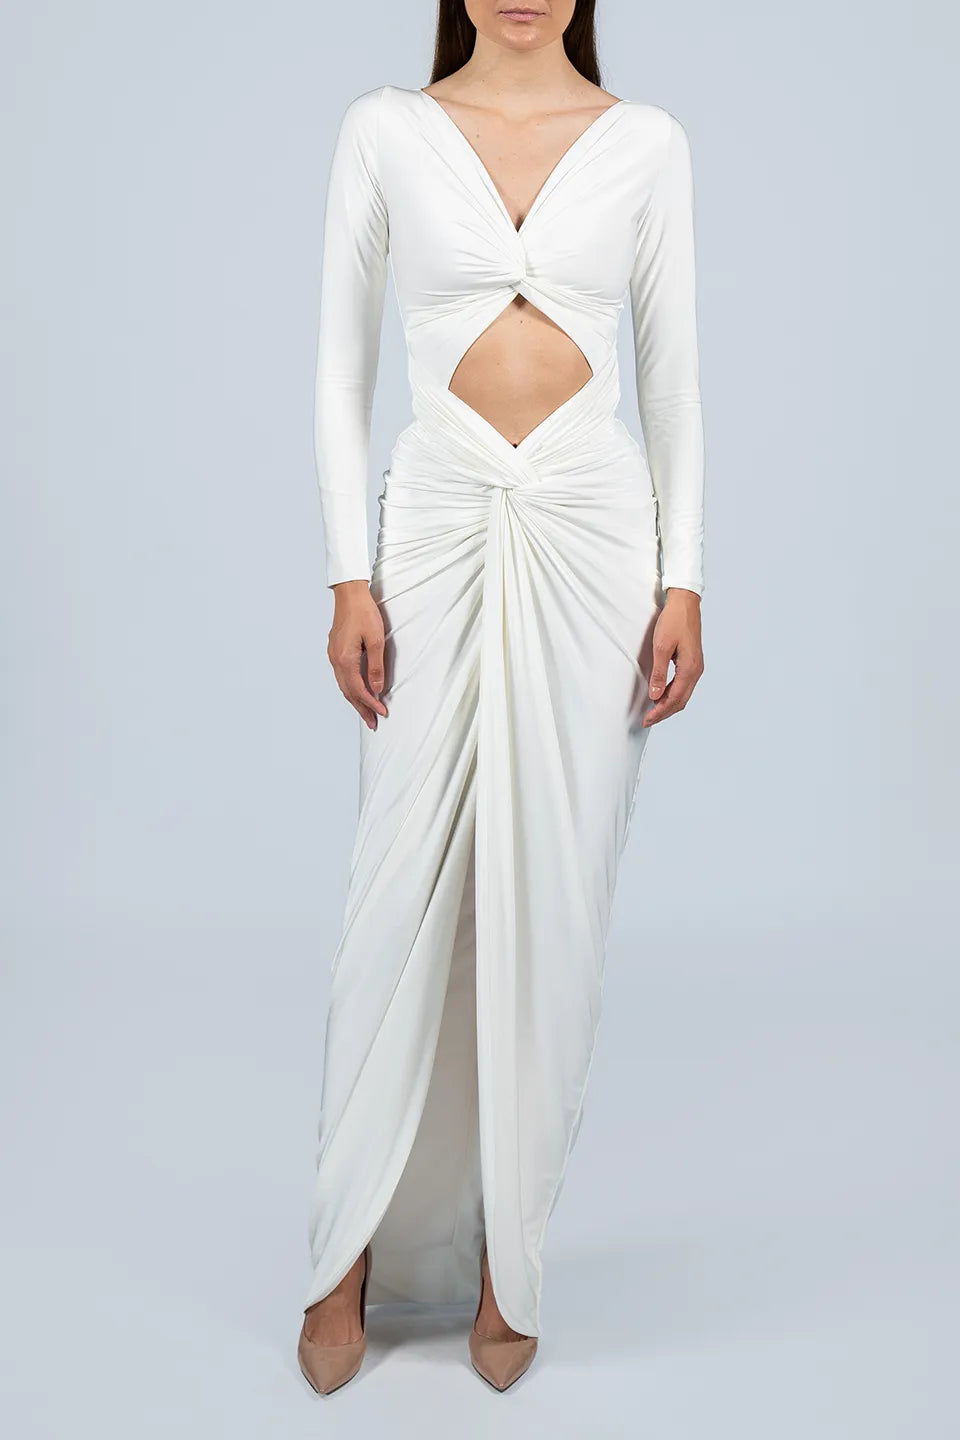 Designer White Maxi dresses, shop online with free delivery in UAE. Product gallery 6